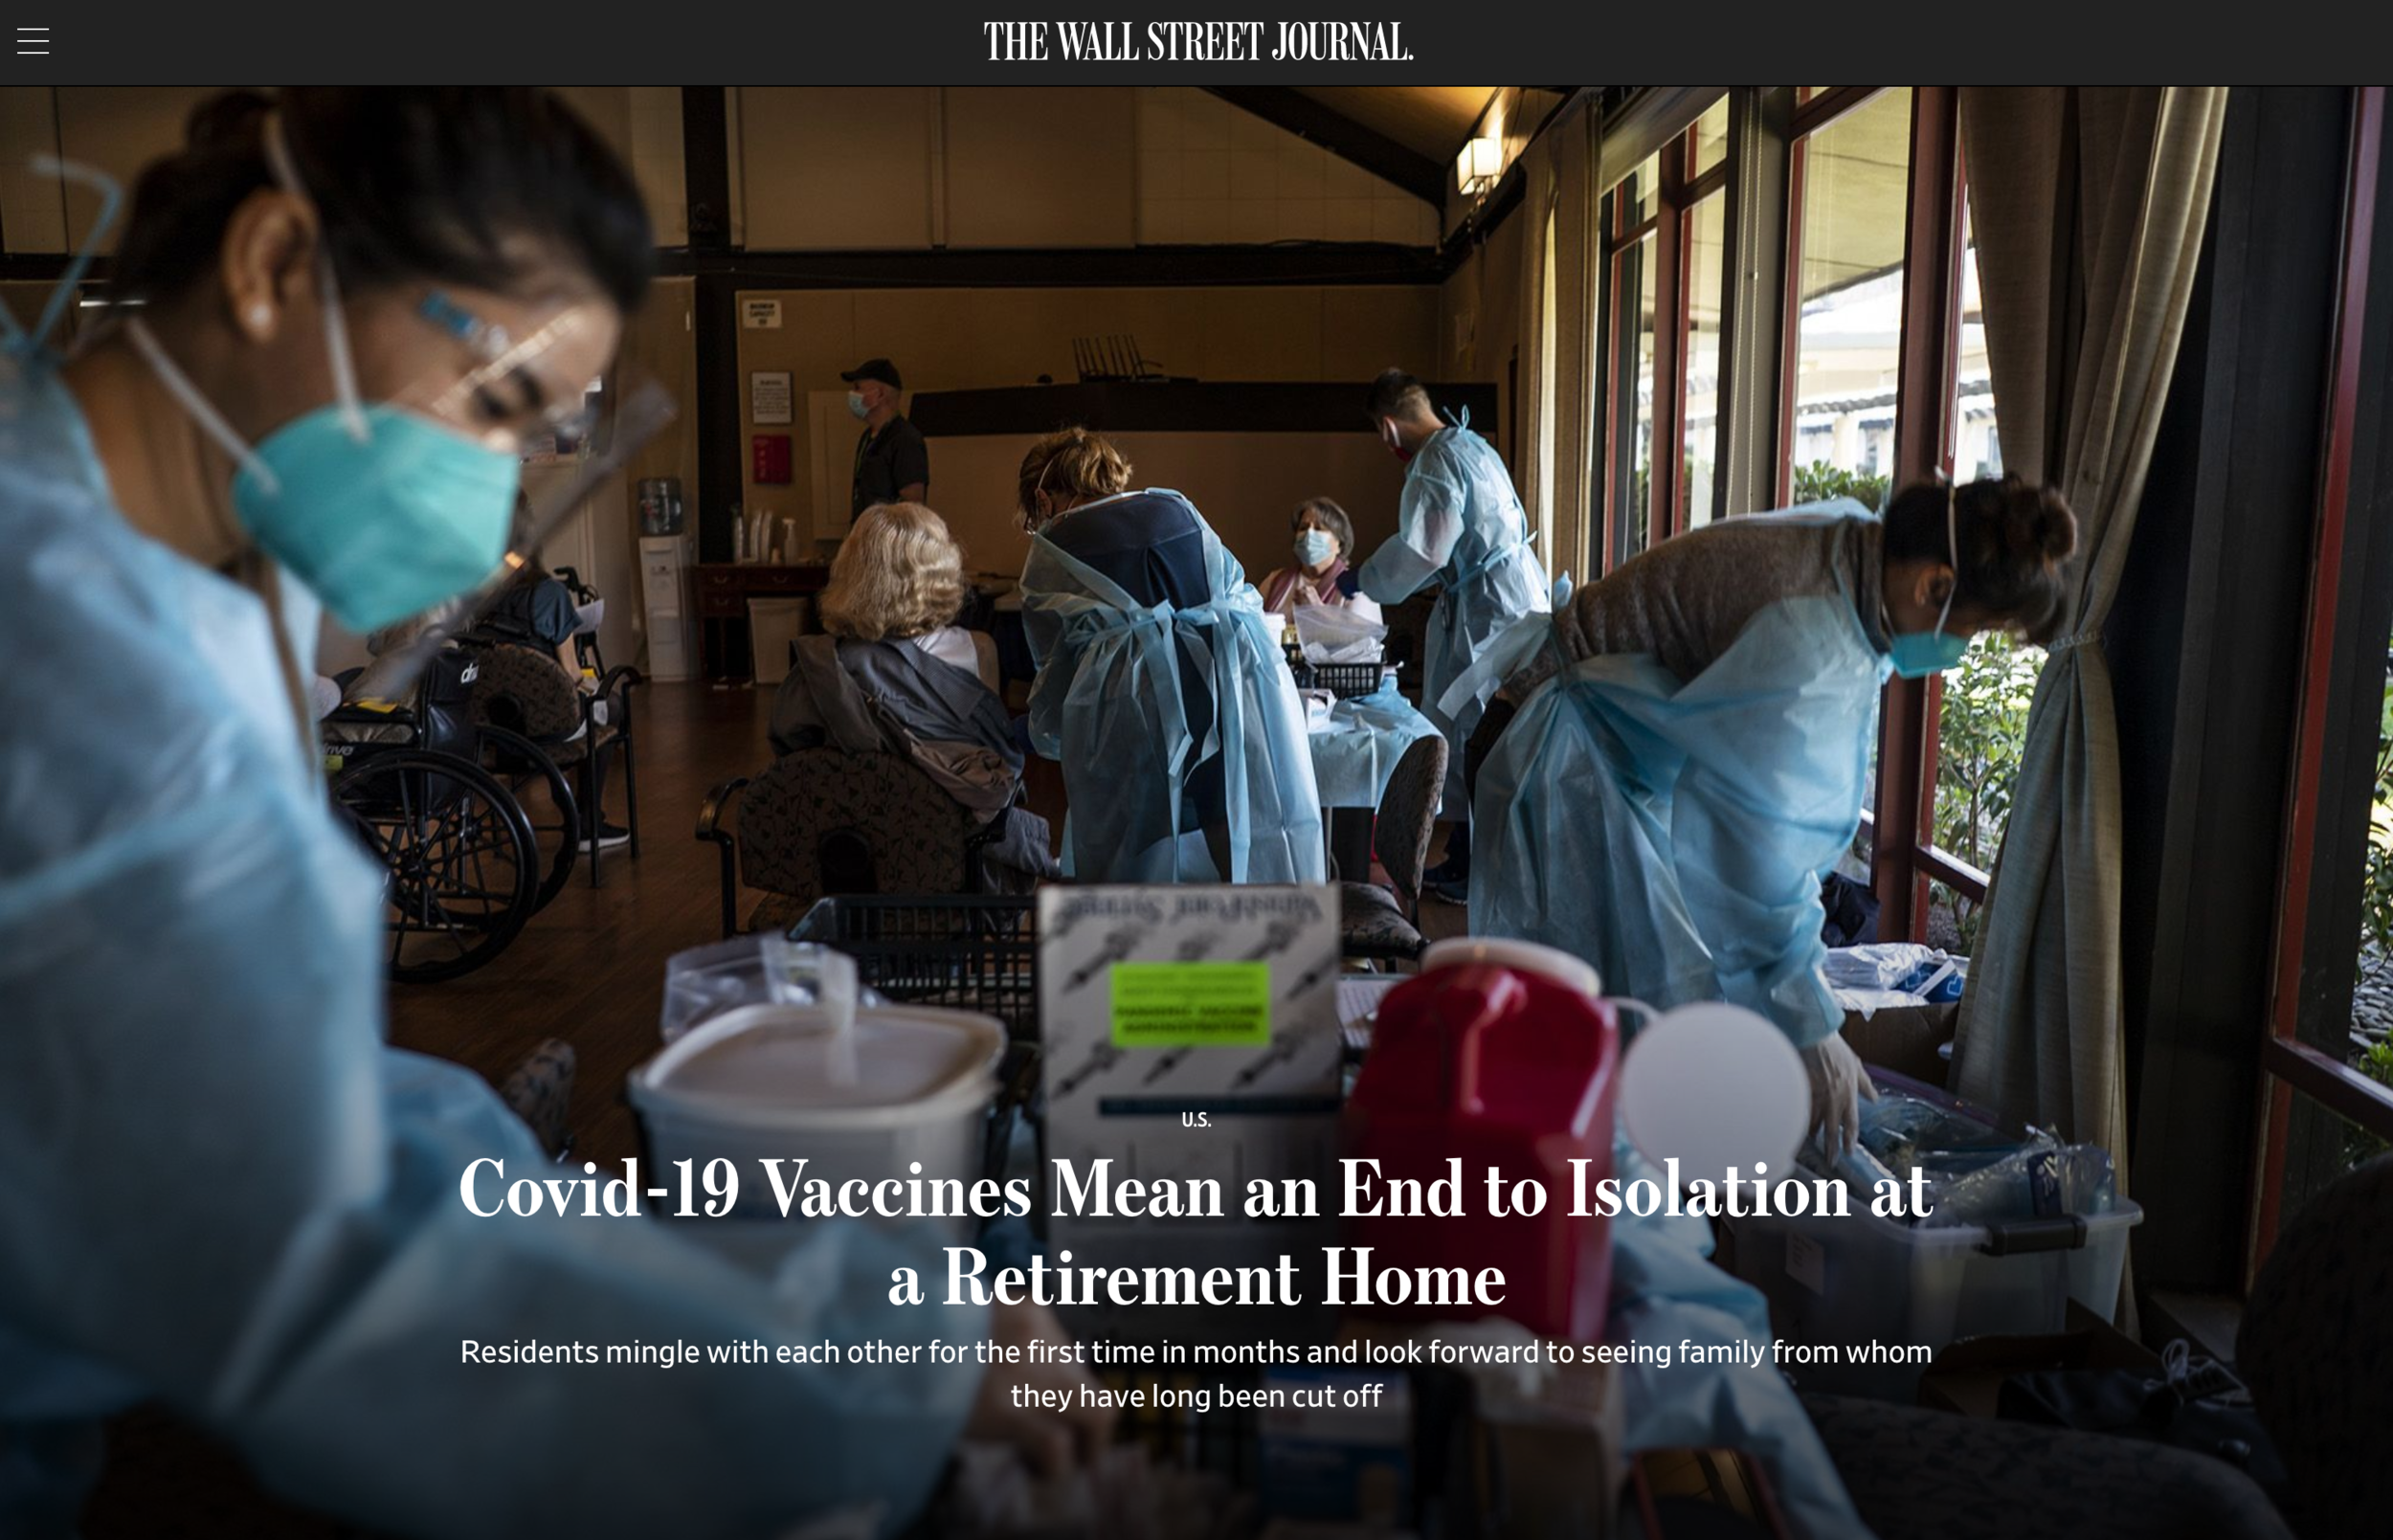  Photography:  Rachel Bujalski   Photo Editing: Ariel Zambelich  Story:  Covid-19 Vaccines Mean an End to Isolation at a Retirement Home     